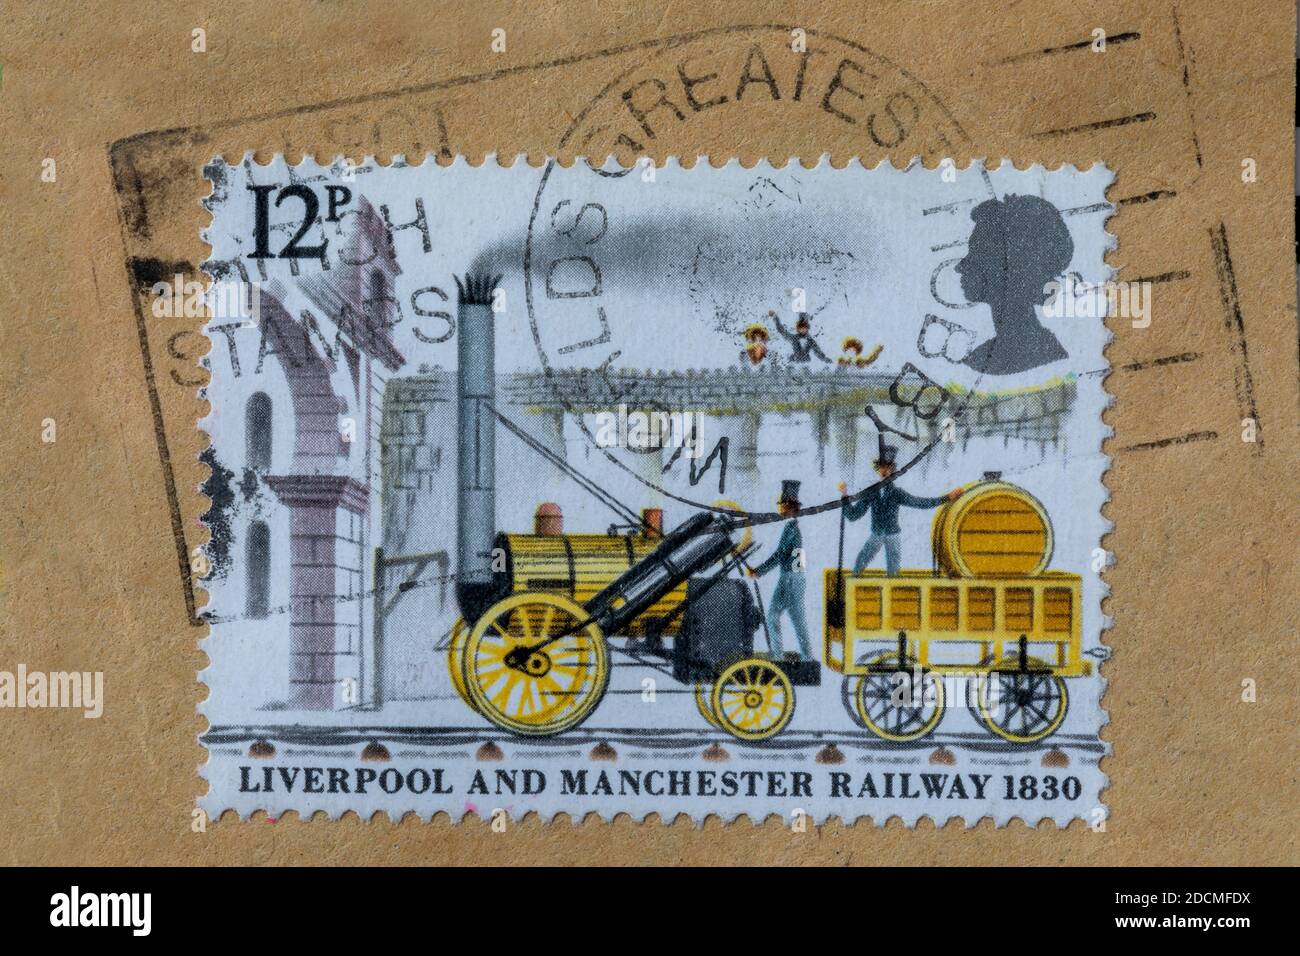 British vintage cancelled postage stamp showing Stephenson's Rocket from 1980. On paper with full postmark saying worlds greatest hobby. Stock Photo